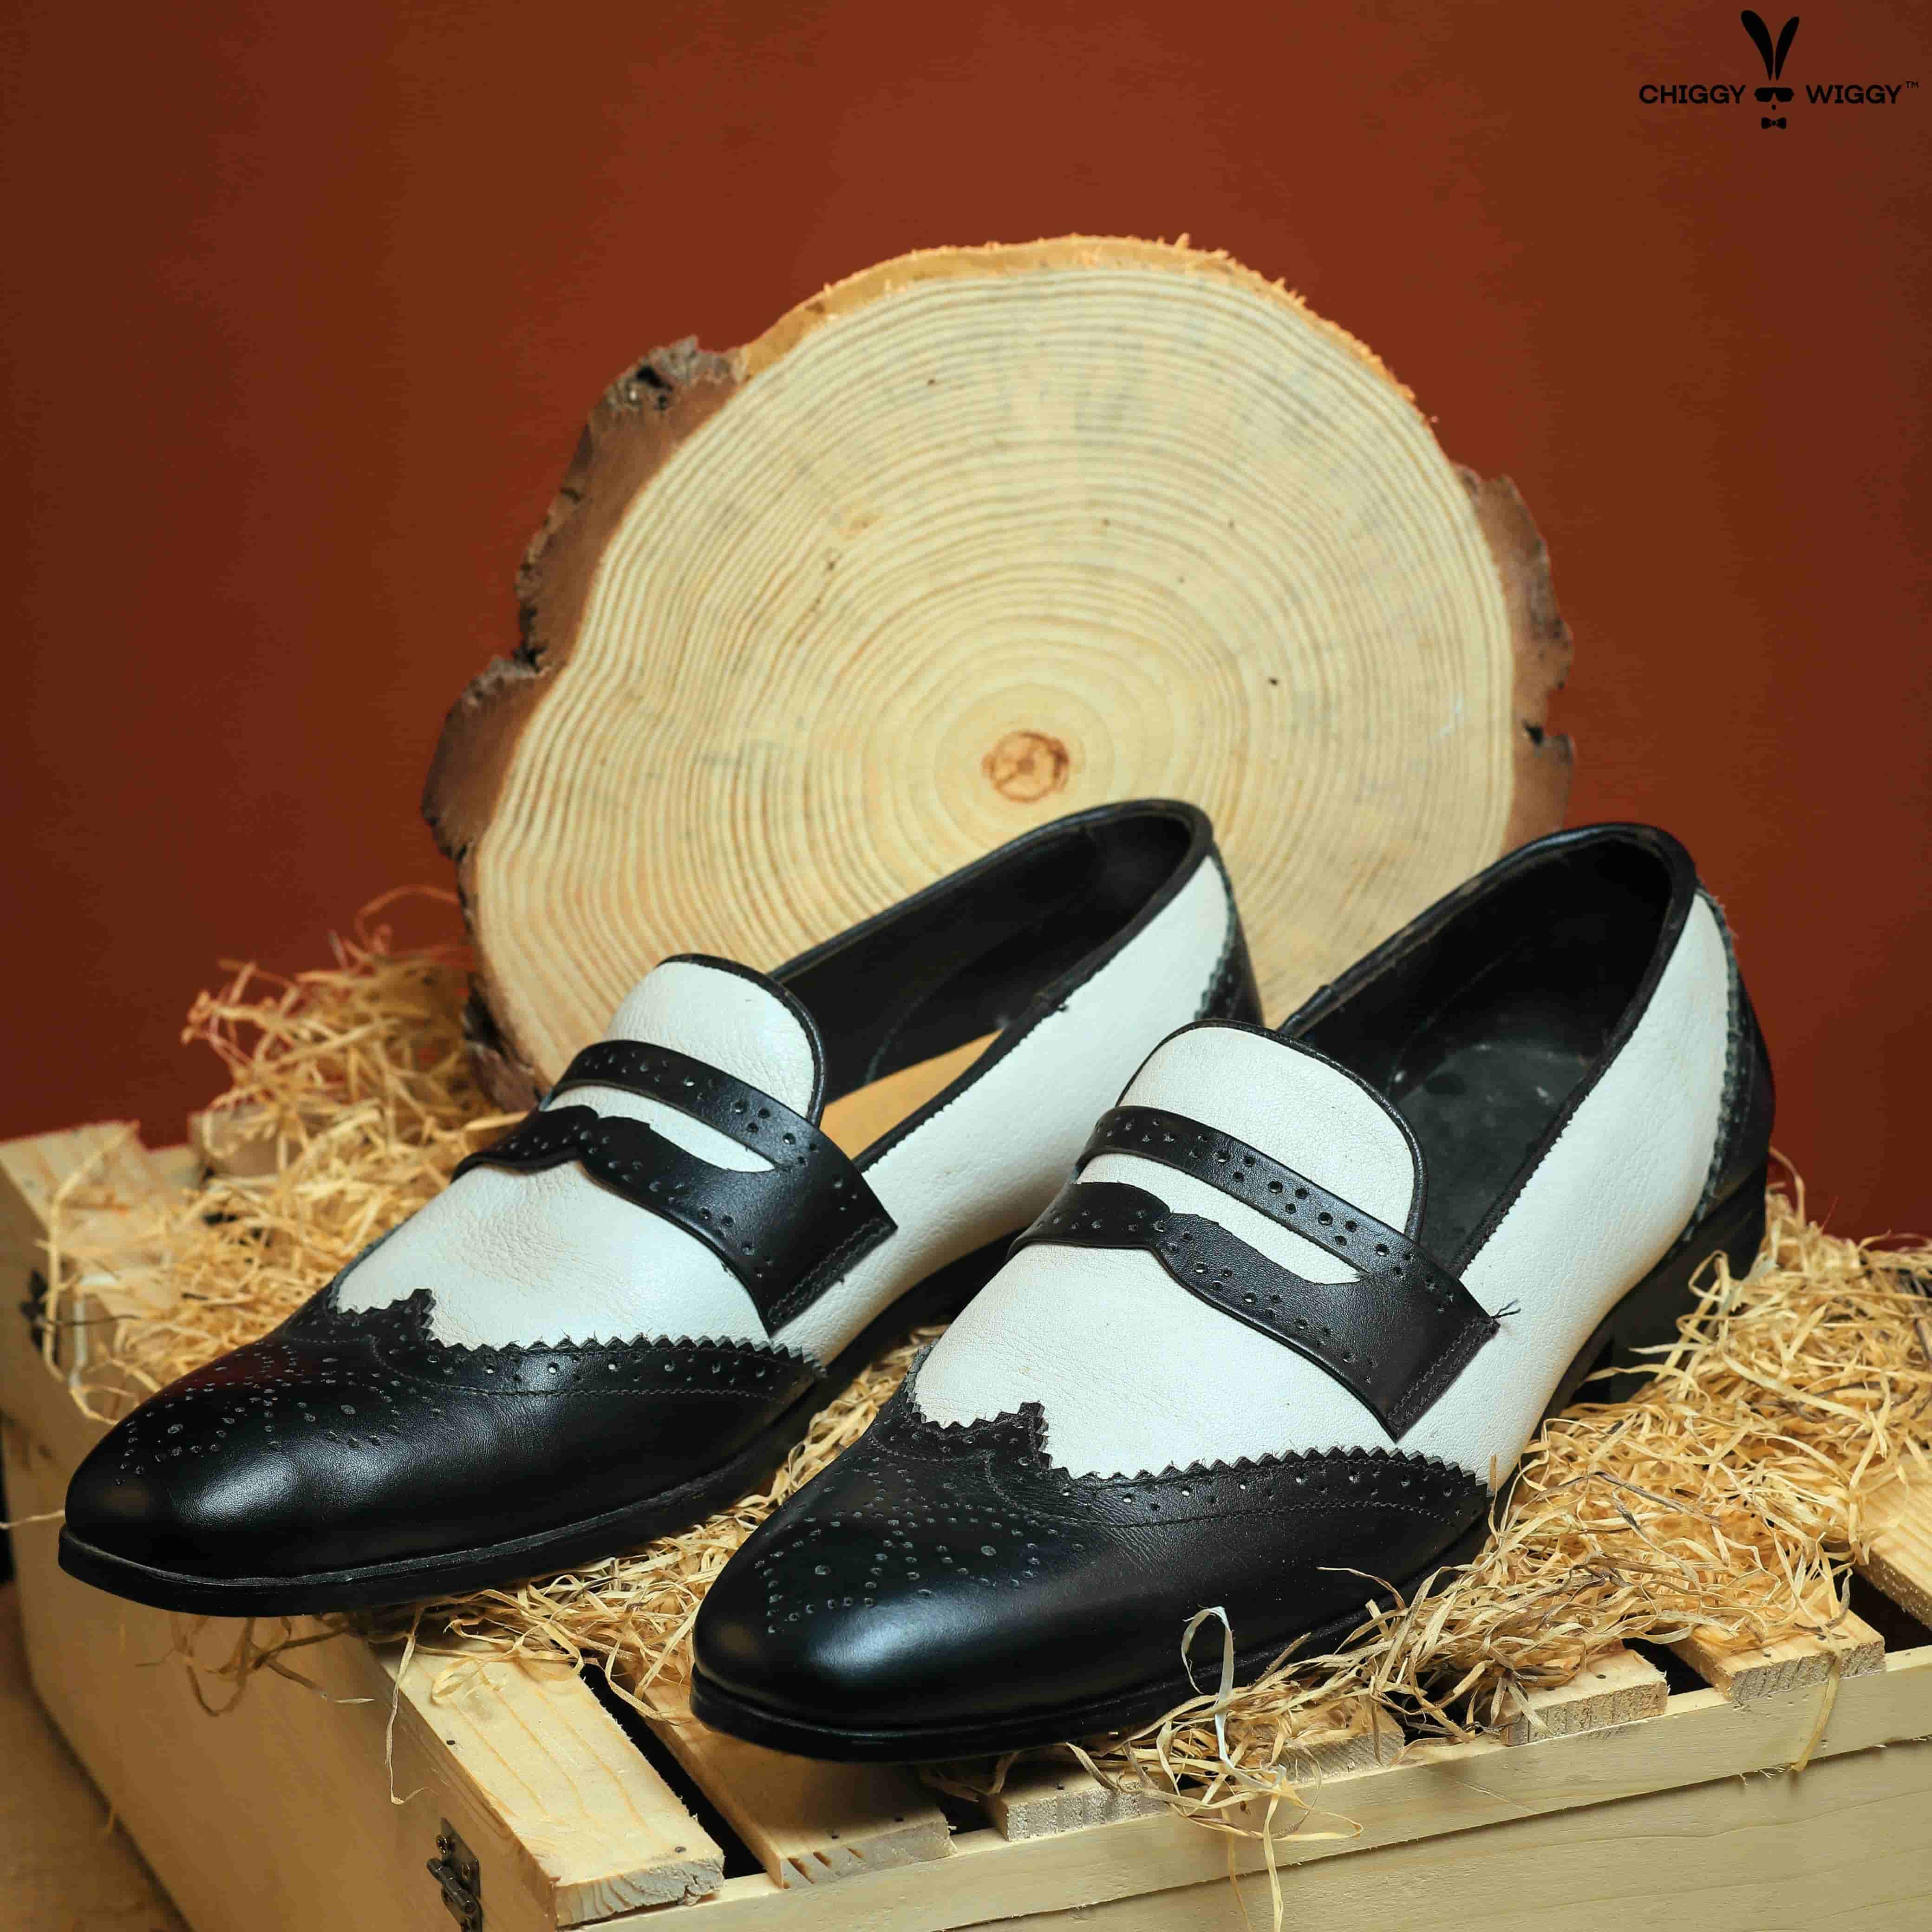 penny-loffer-black-and-white-original-leather-sole-leather-the-chiggy-wiggy-pennyloafer-shoes-2